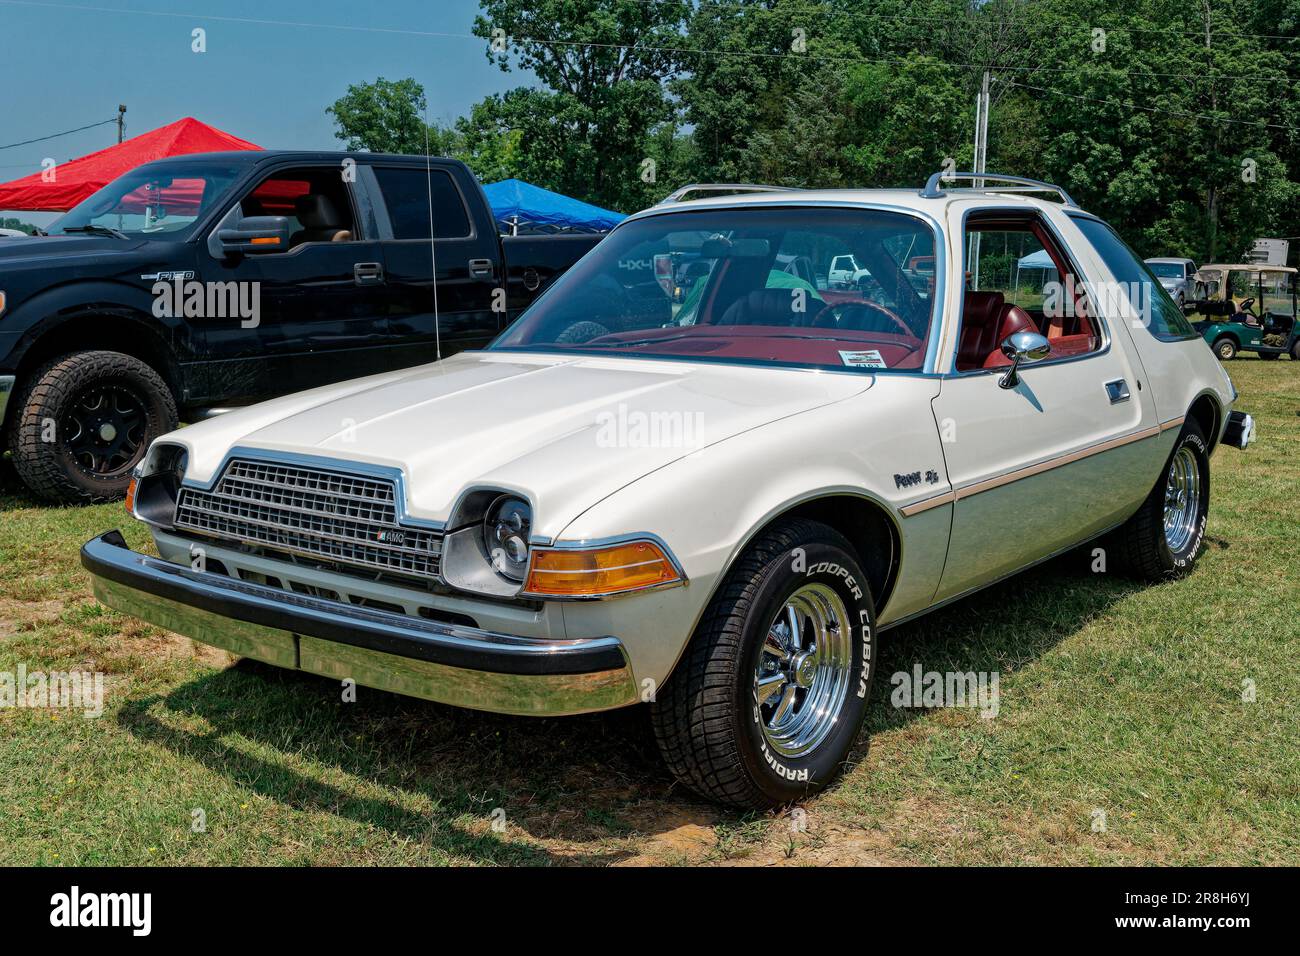 Late 1970's model AMC Pacer car restored back to original with some modifications angle closeup view Stock Photo